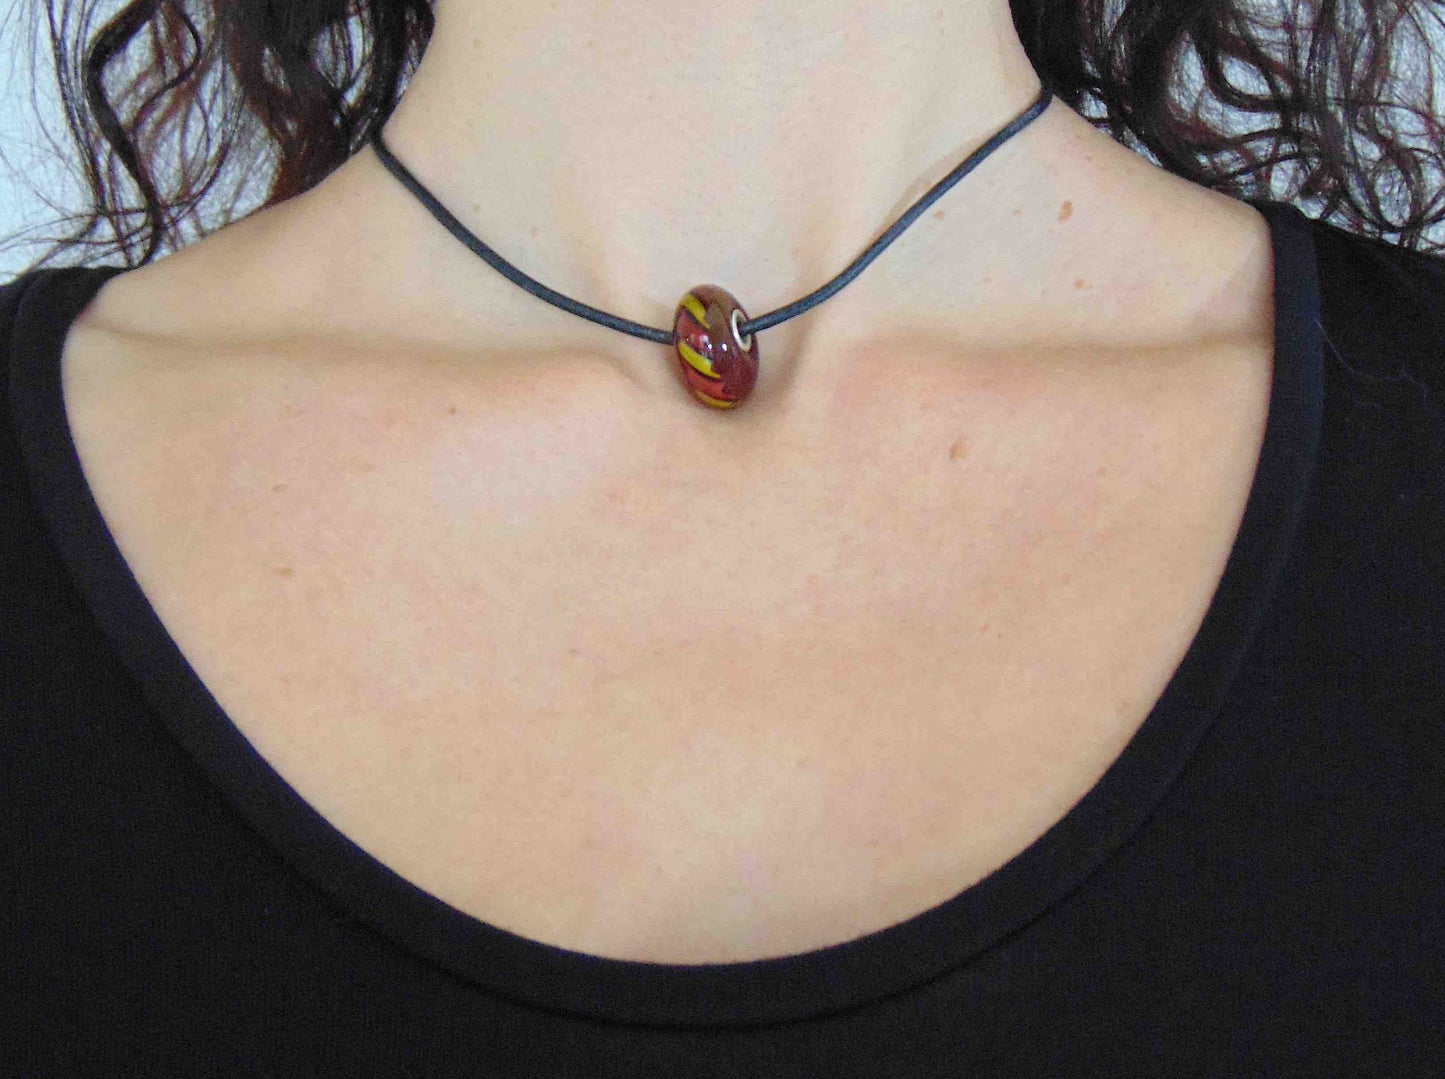 Choker necklace with burgundy red glass bead (Murano-style glass handmade in Montreal), red and yellow cane pattern, black leather cord, stainless steel clasp